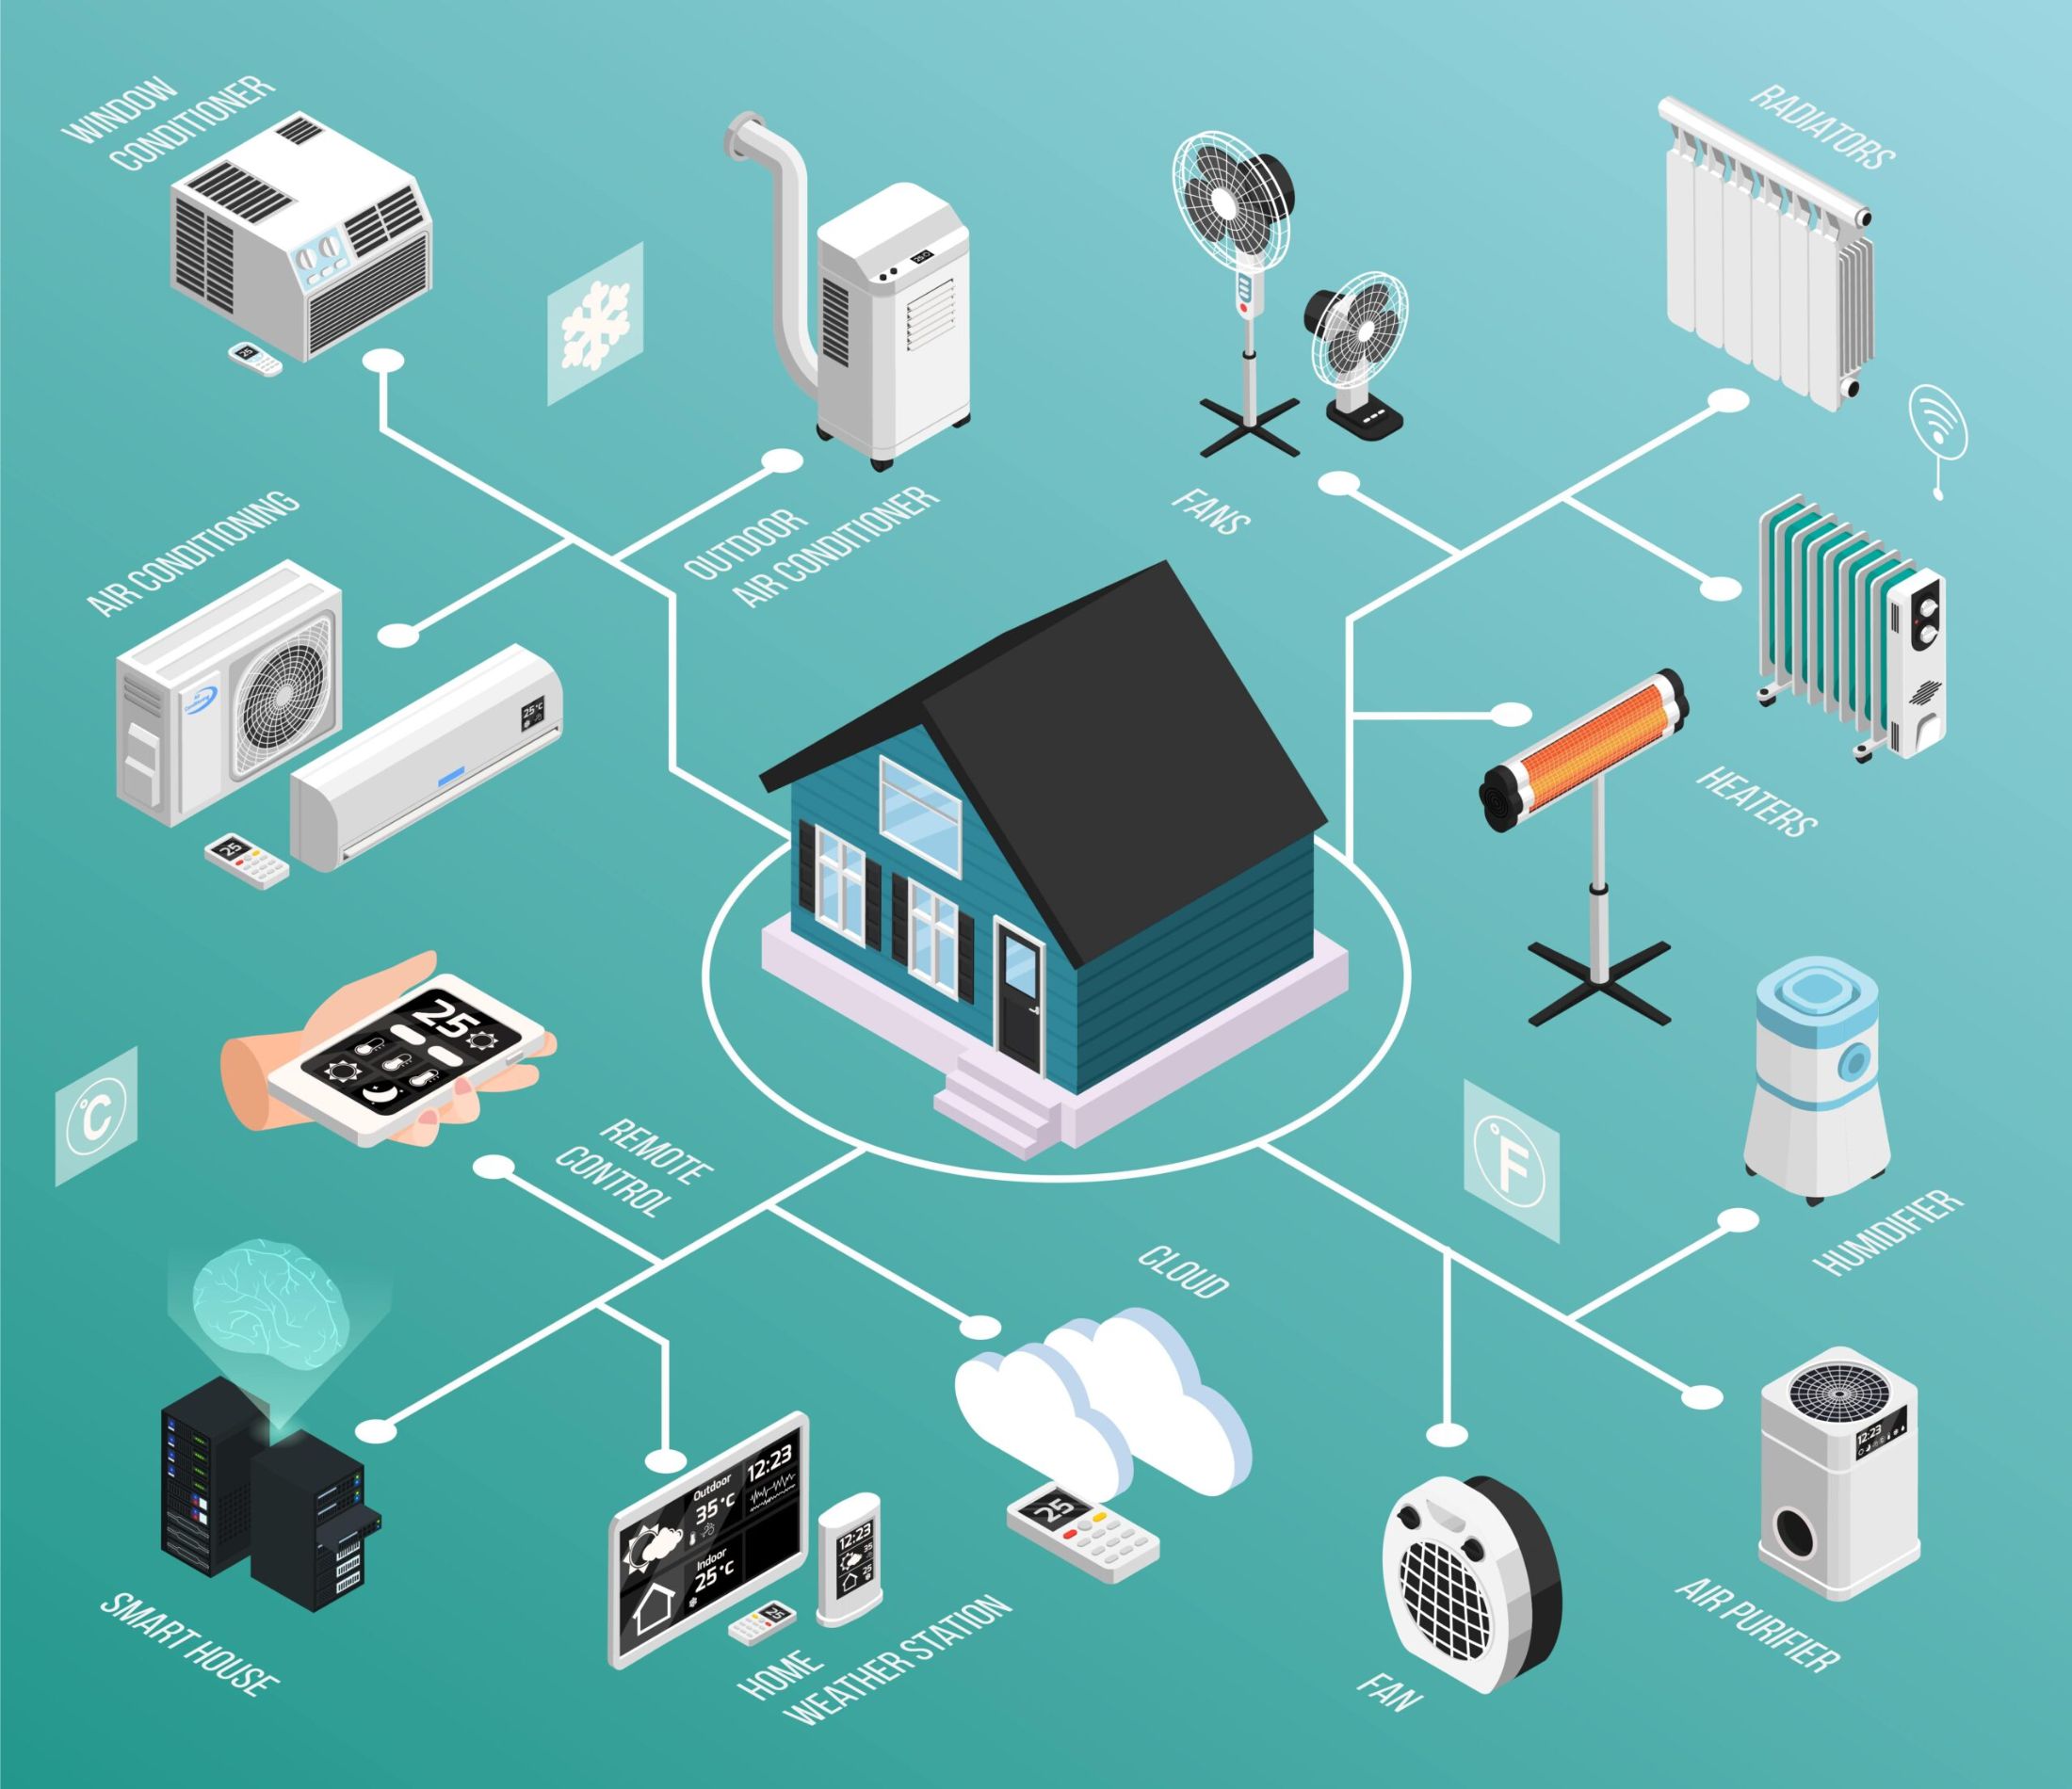 How IoT Home Automation Works